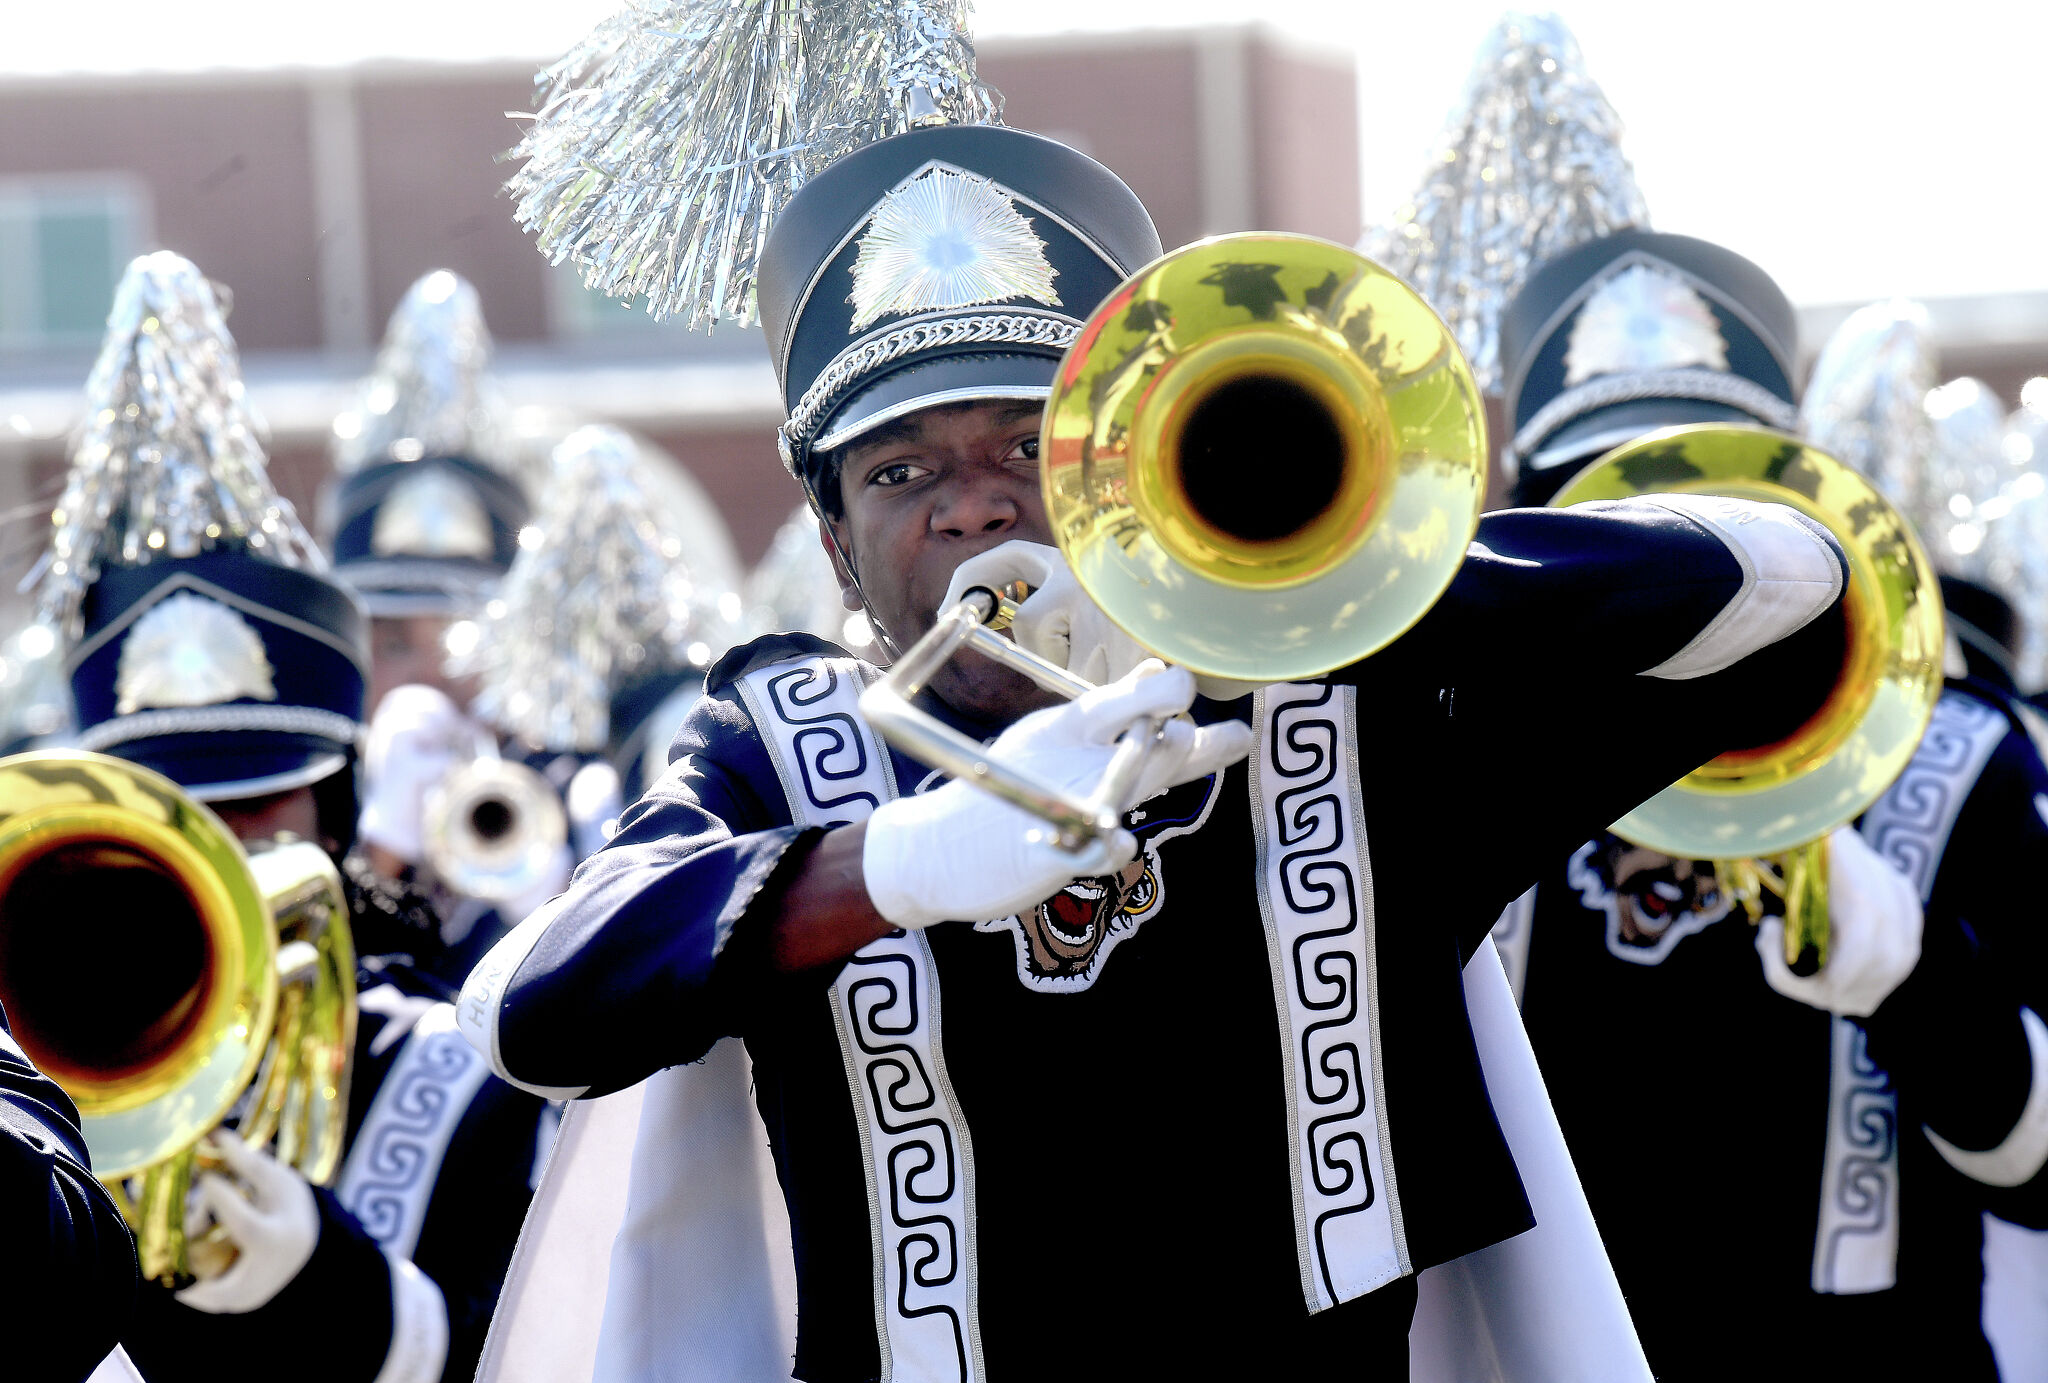 Marching to the Beat of Their Own Drum: The Magic of High School Bands –  TEACH Magazine